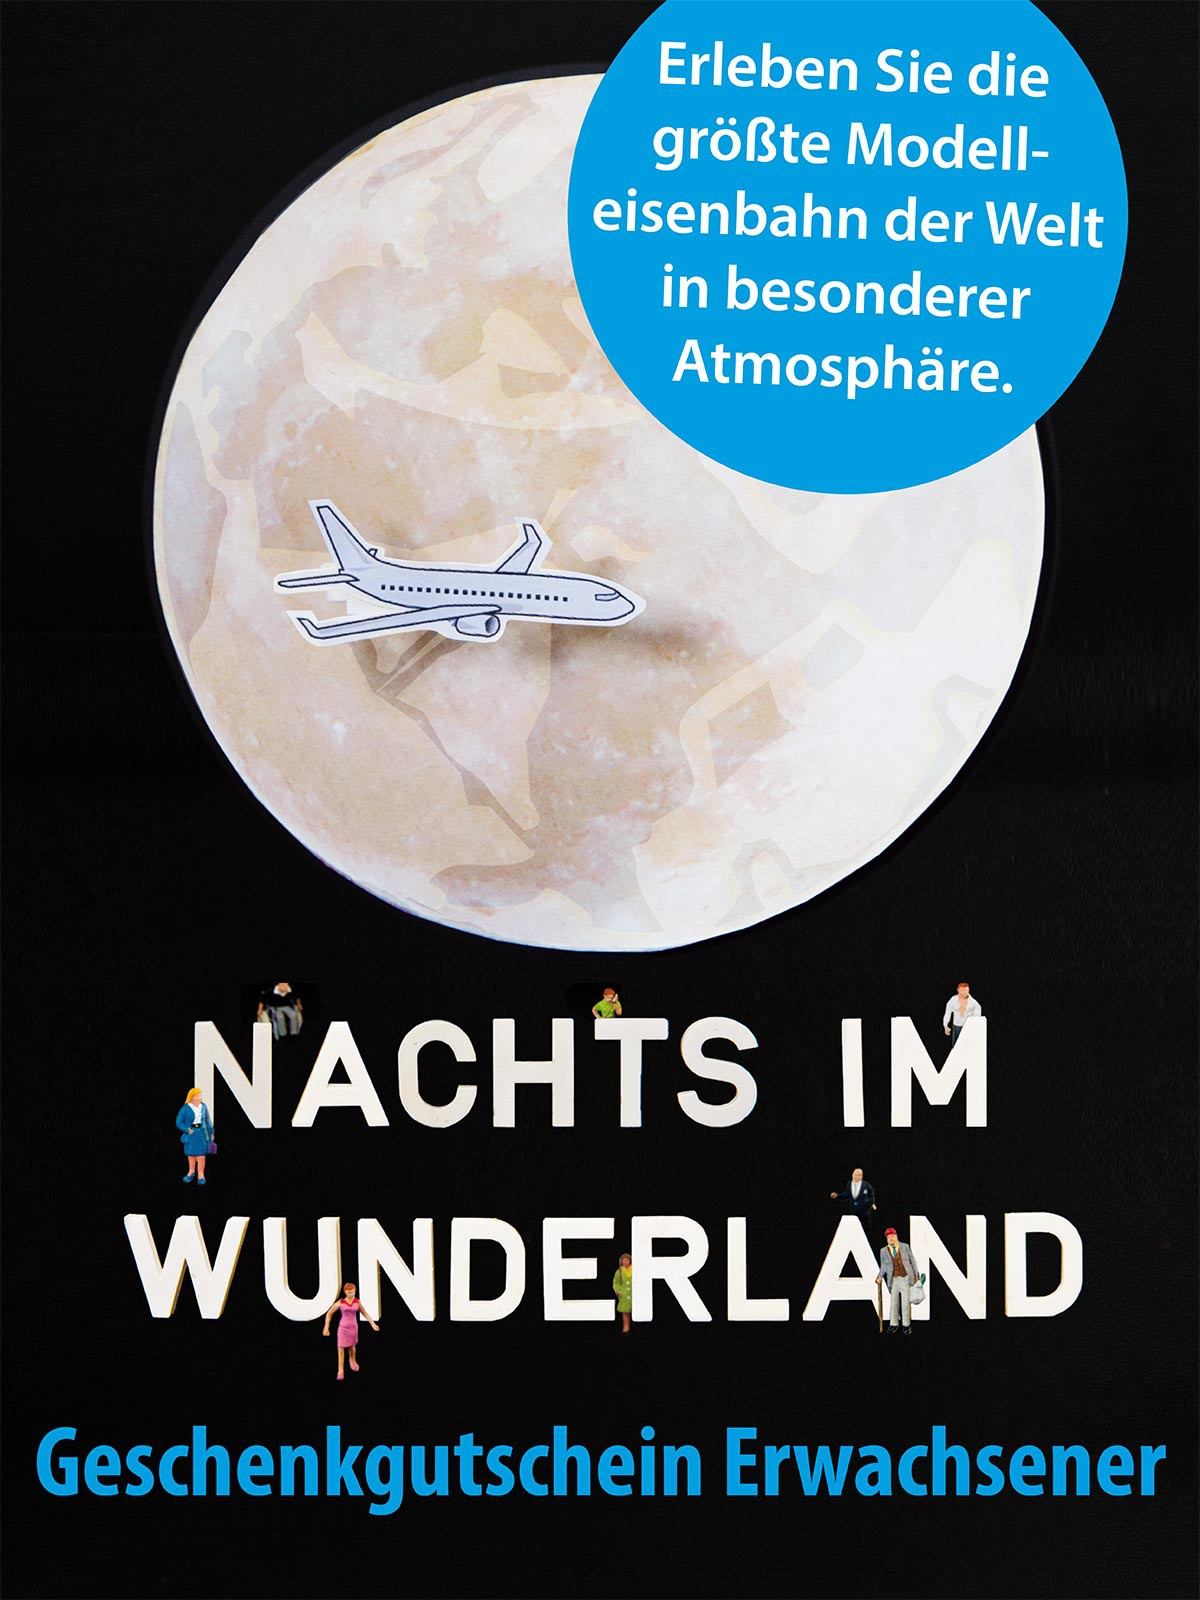 „A Night in Wunderland“ Gift Voucher for Adults